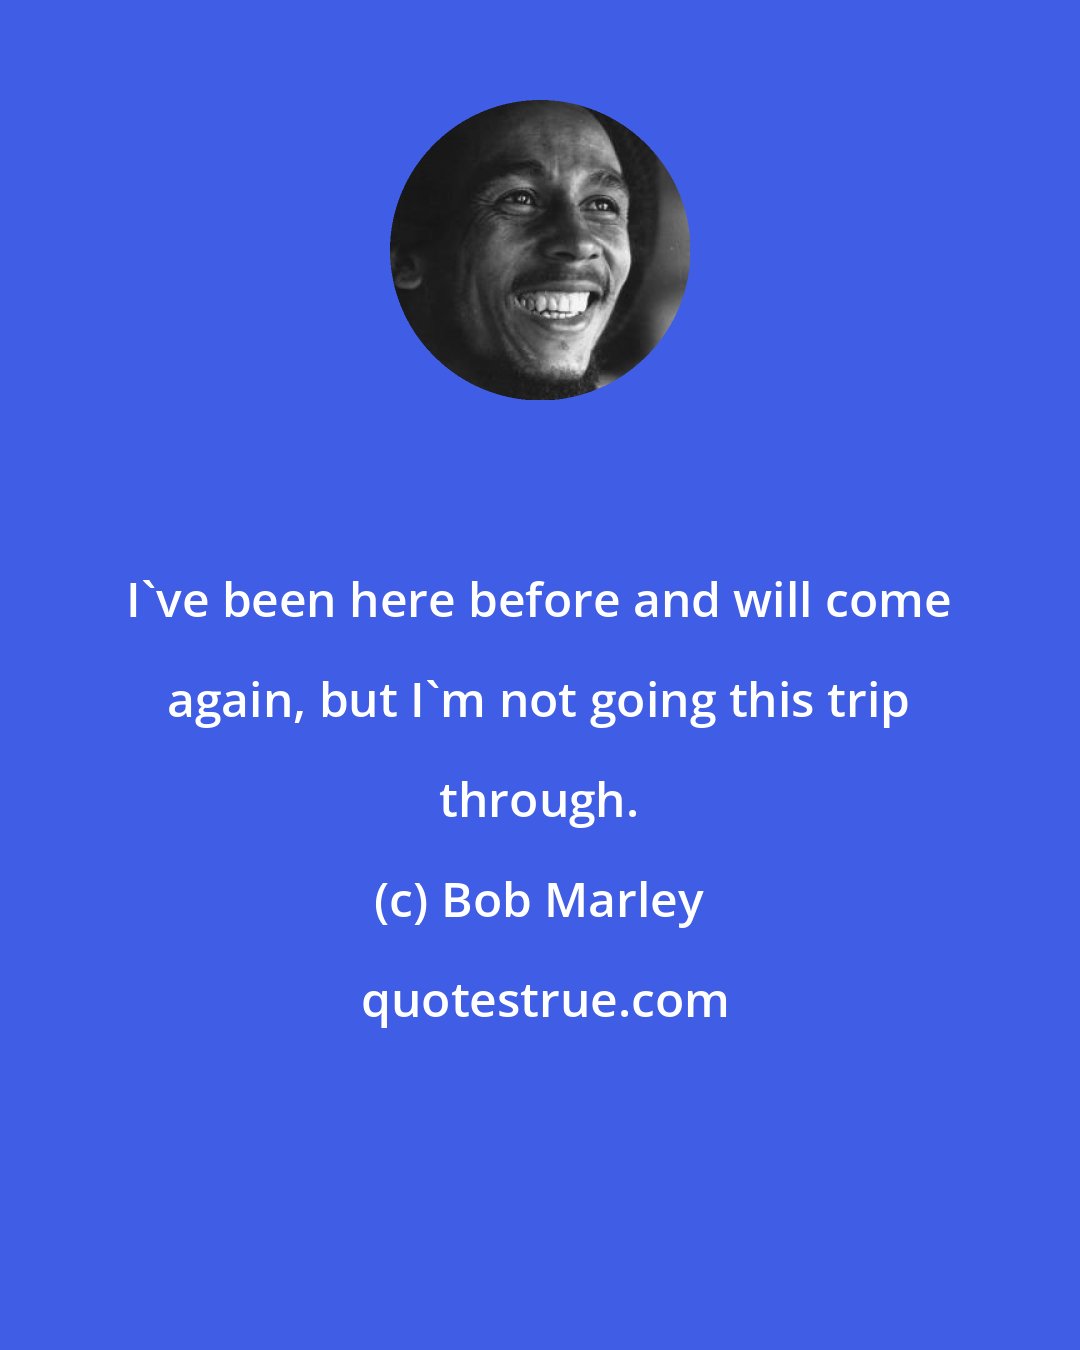 Bob Marley: I've been here before and will come again, but I'm not going this trip through.